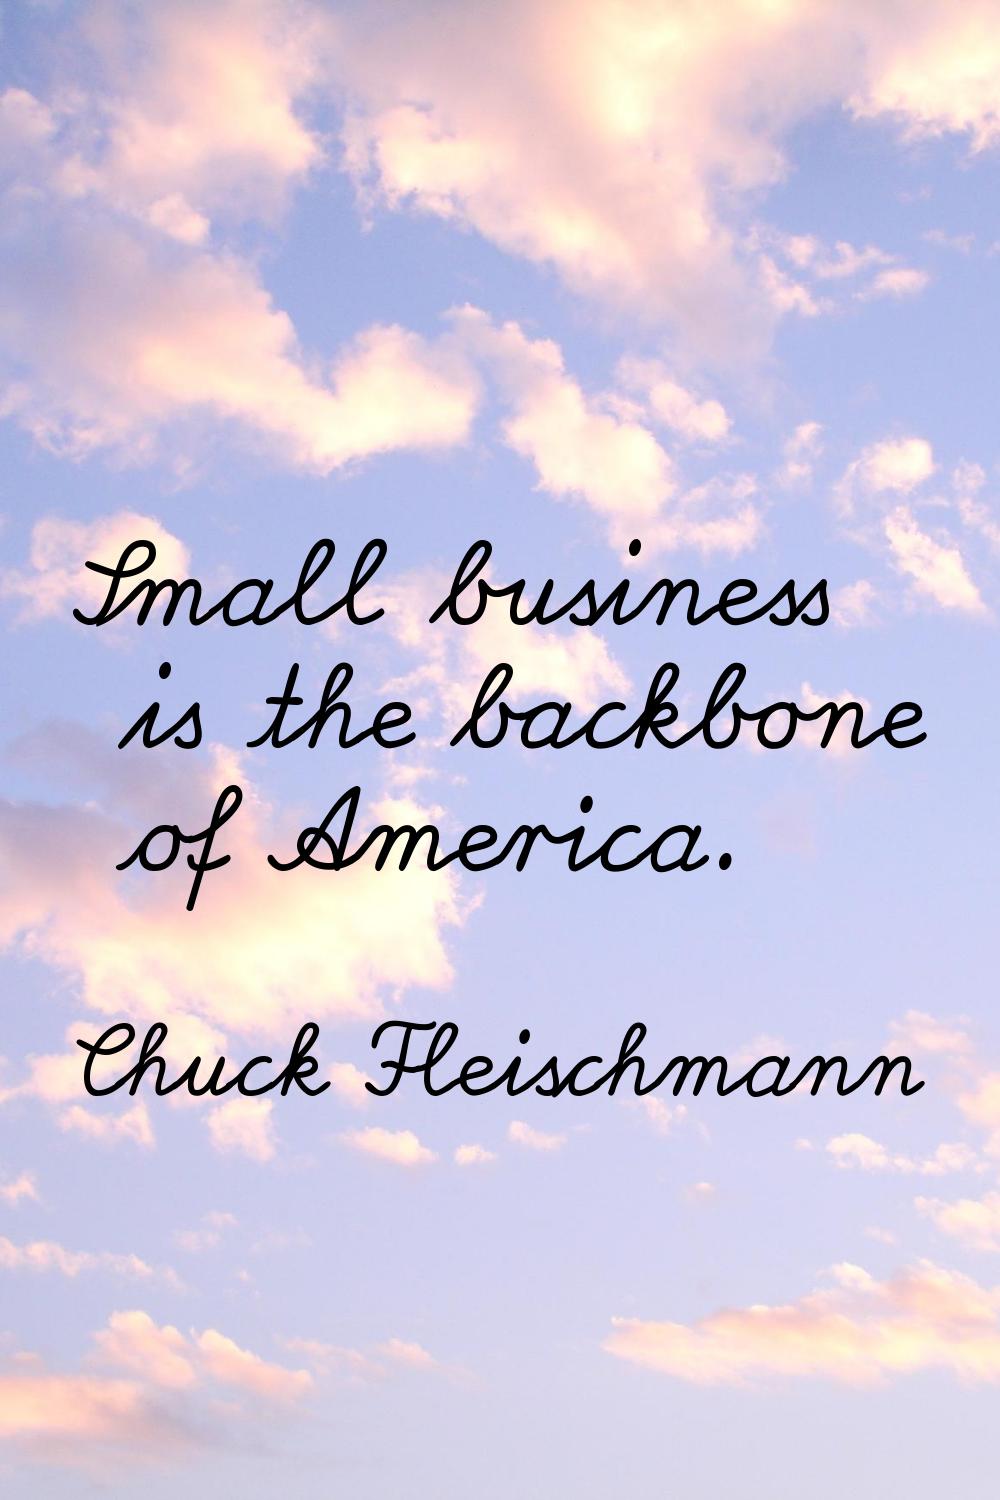 Small business is the backbone of America.